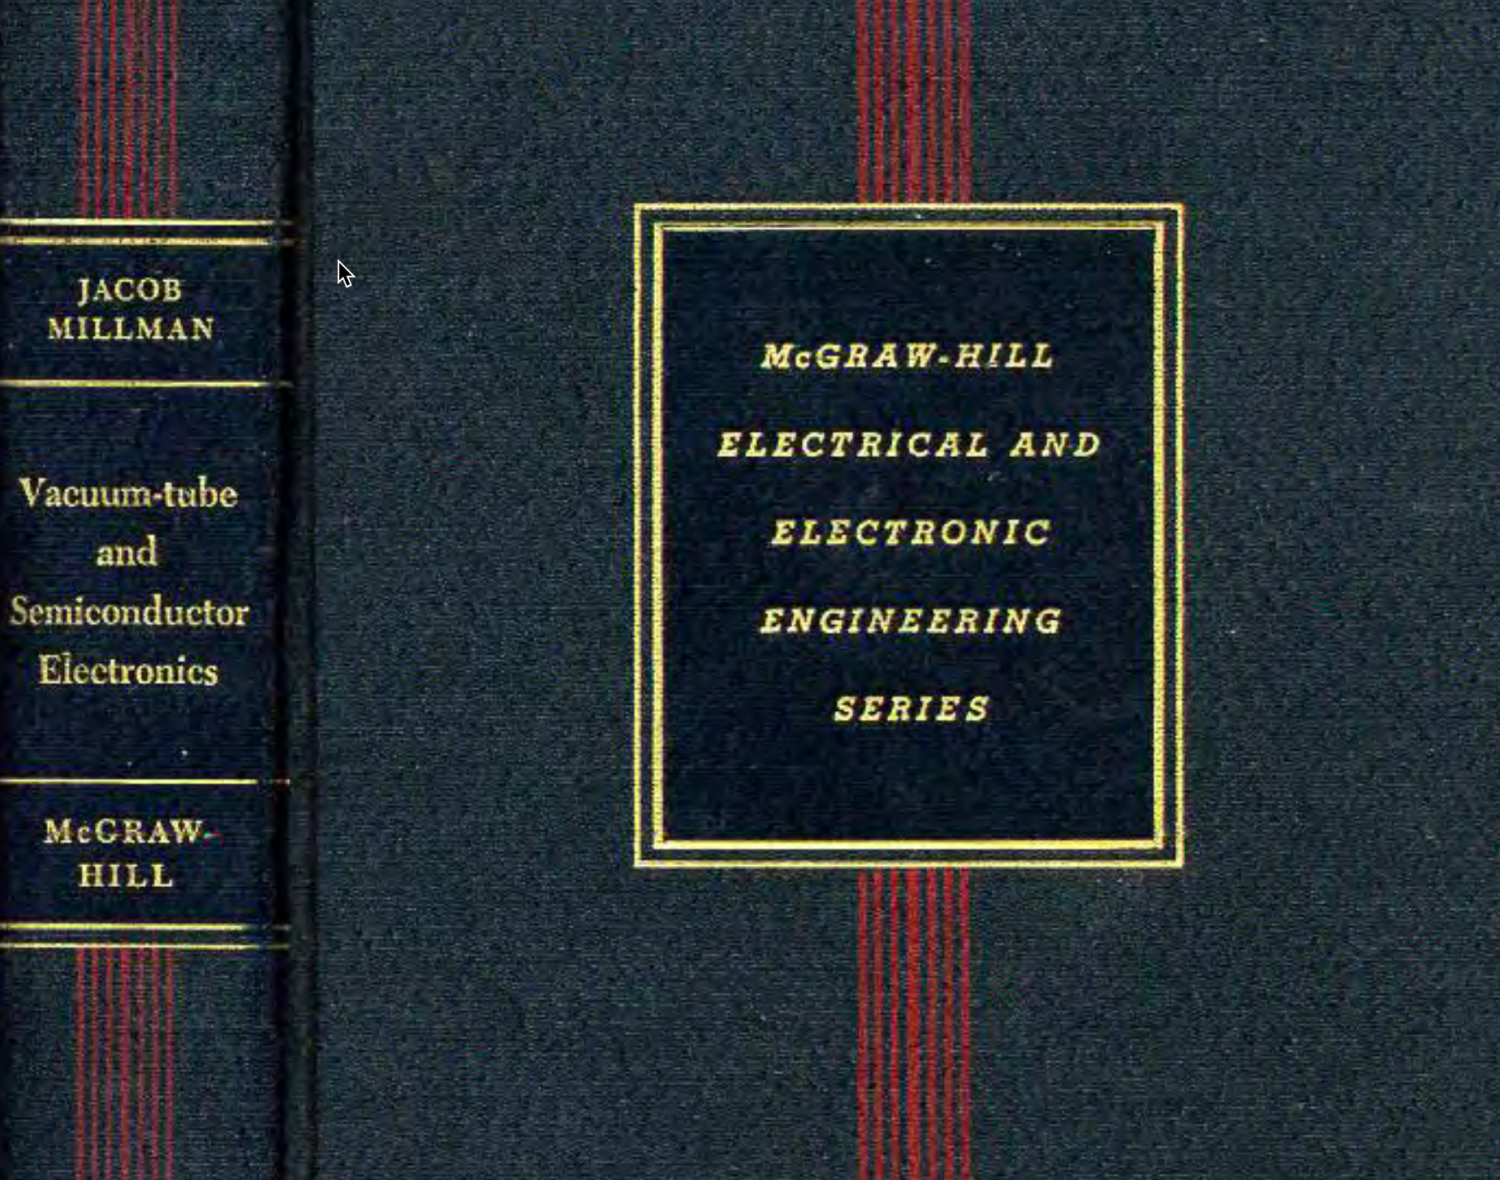 Vacum-Tube and Semiconductor Electronics by Jacob Millman (1958)